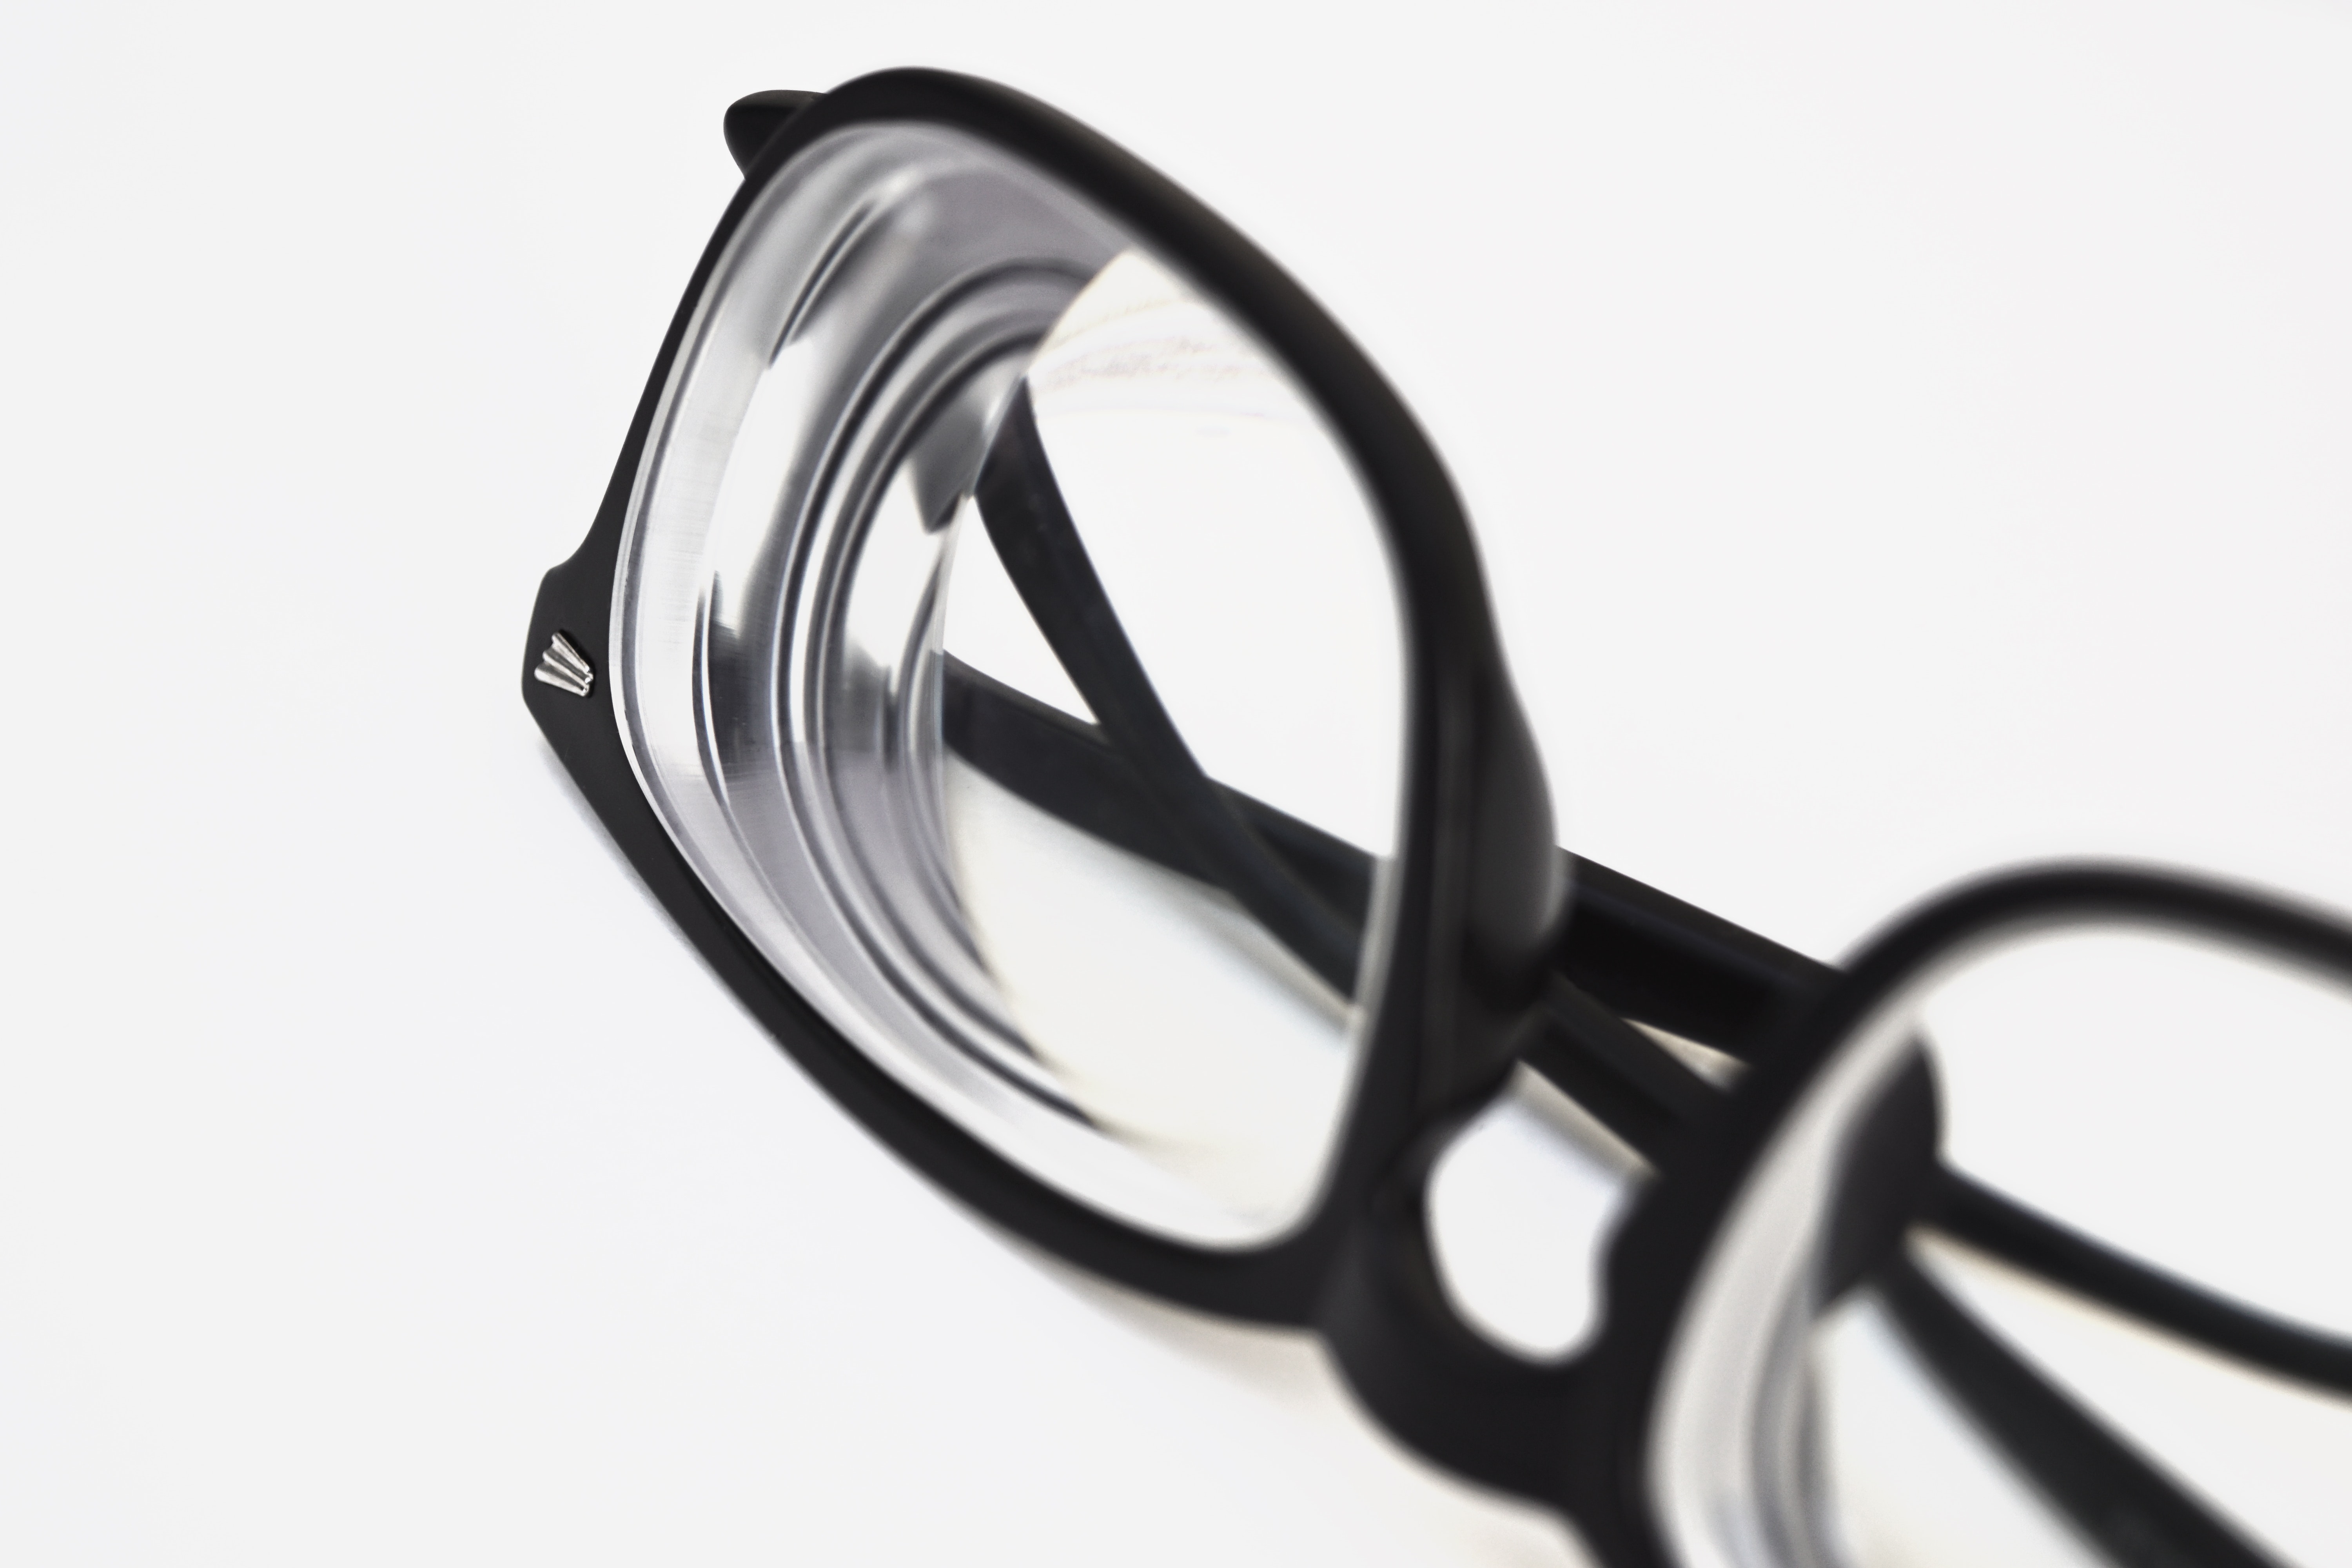 Pair of black glasses with extremely thick lenses